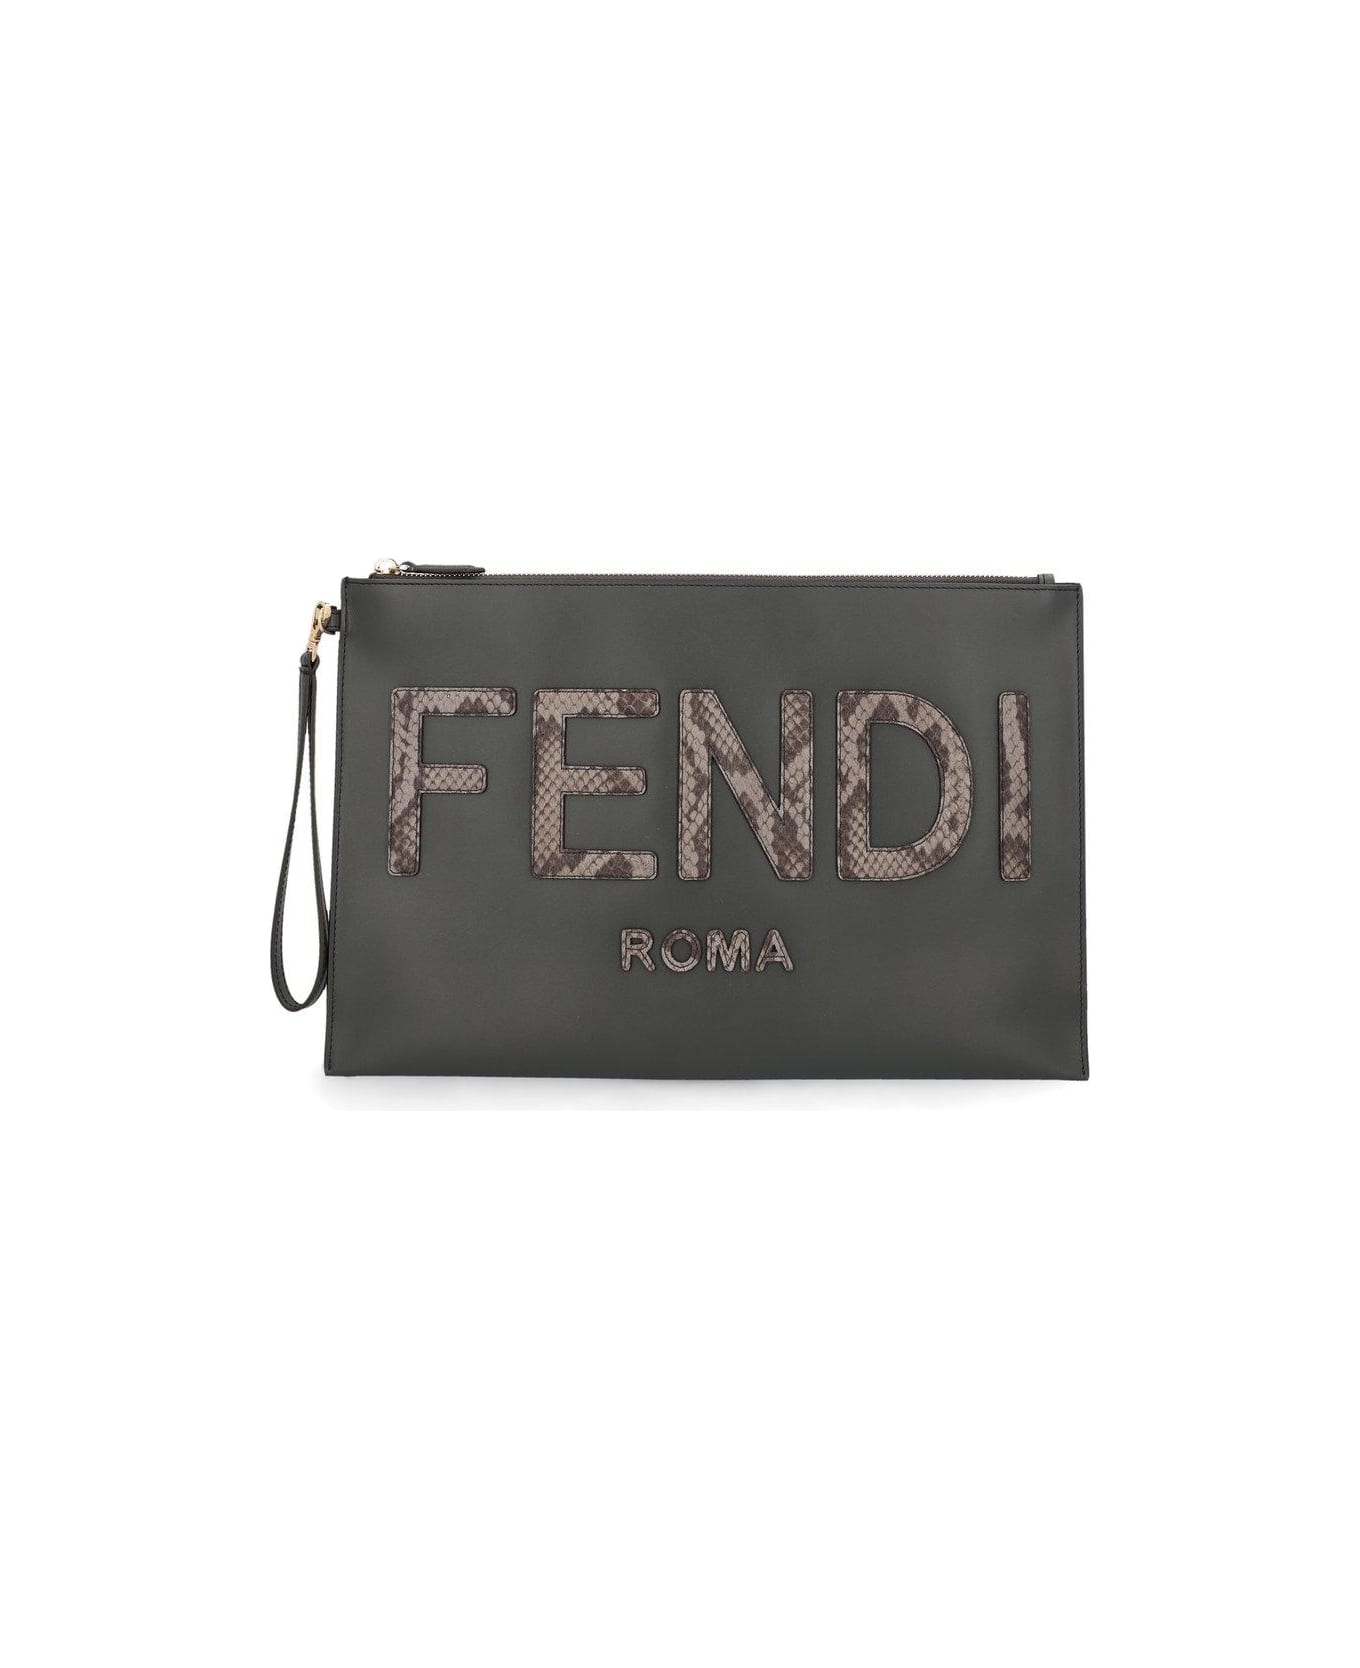 Fendi Logo Detailed Large Flat Pouch - Grey, brown  クラッチバッグ